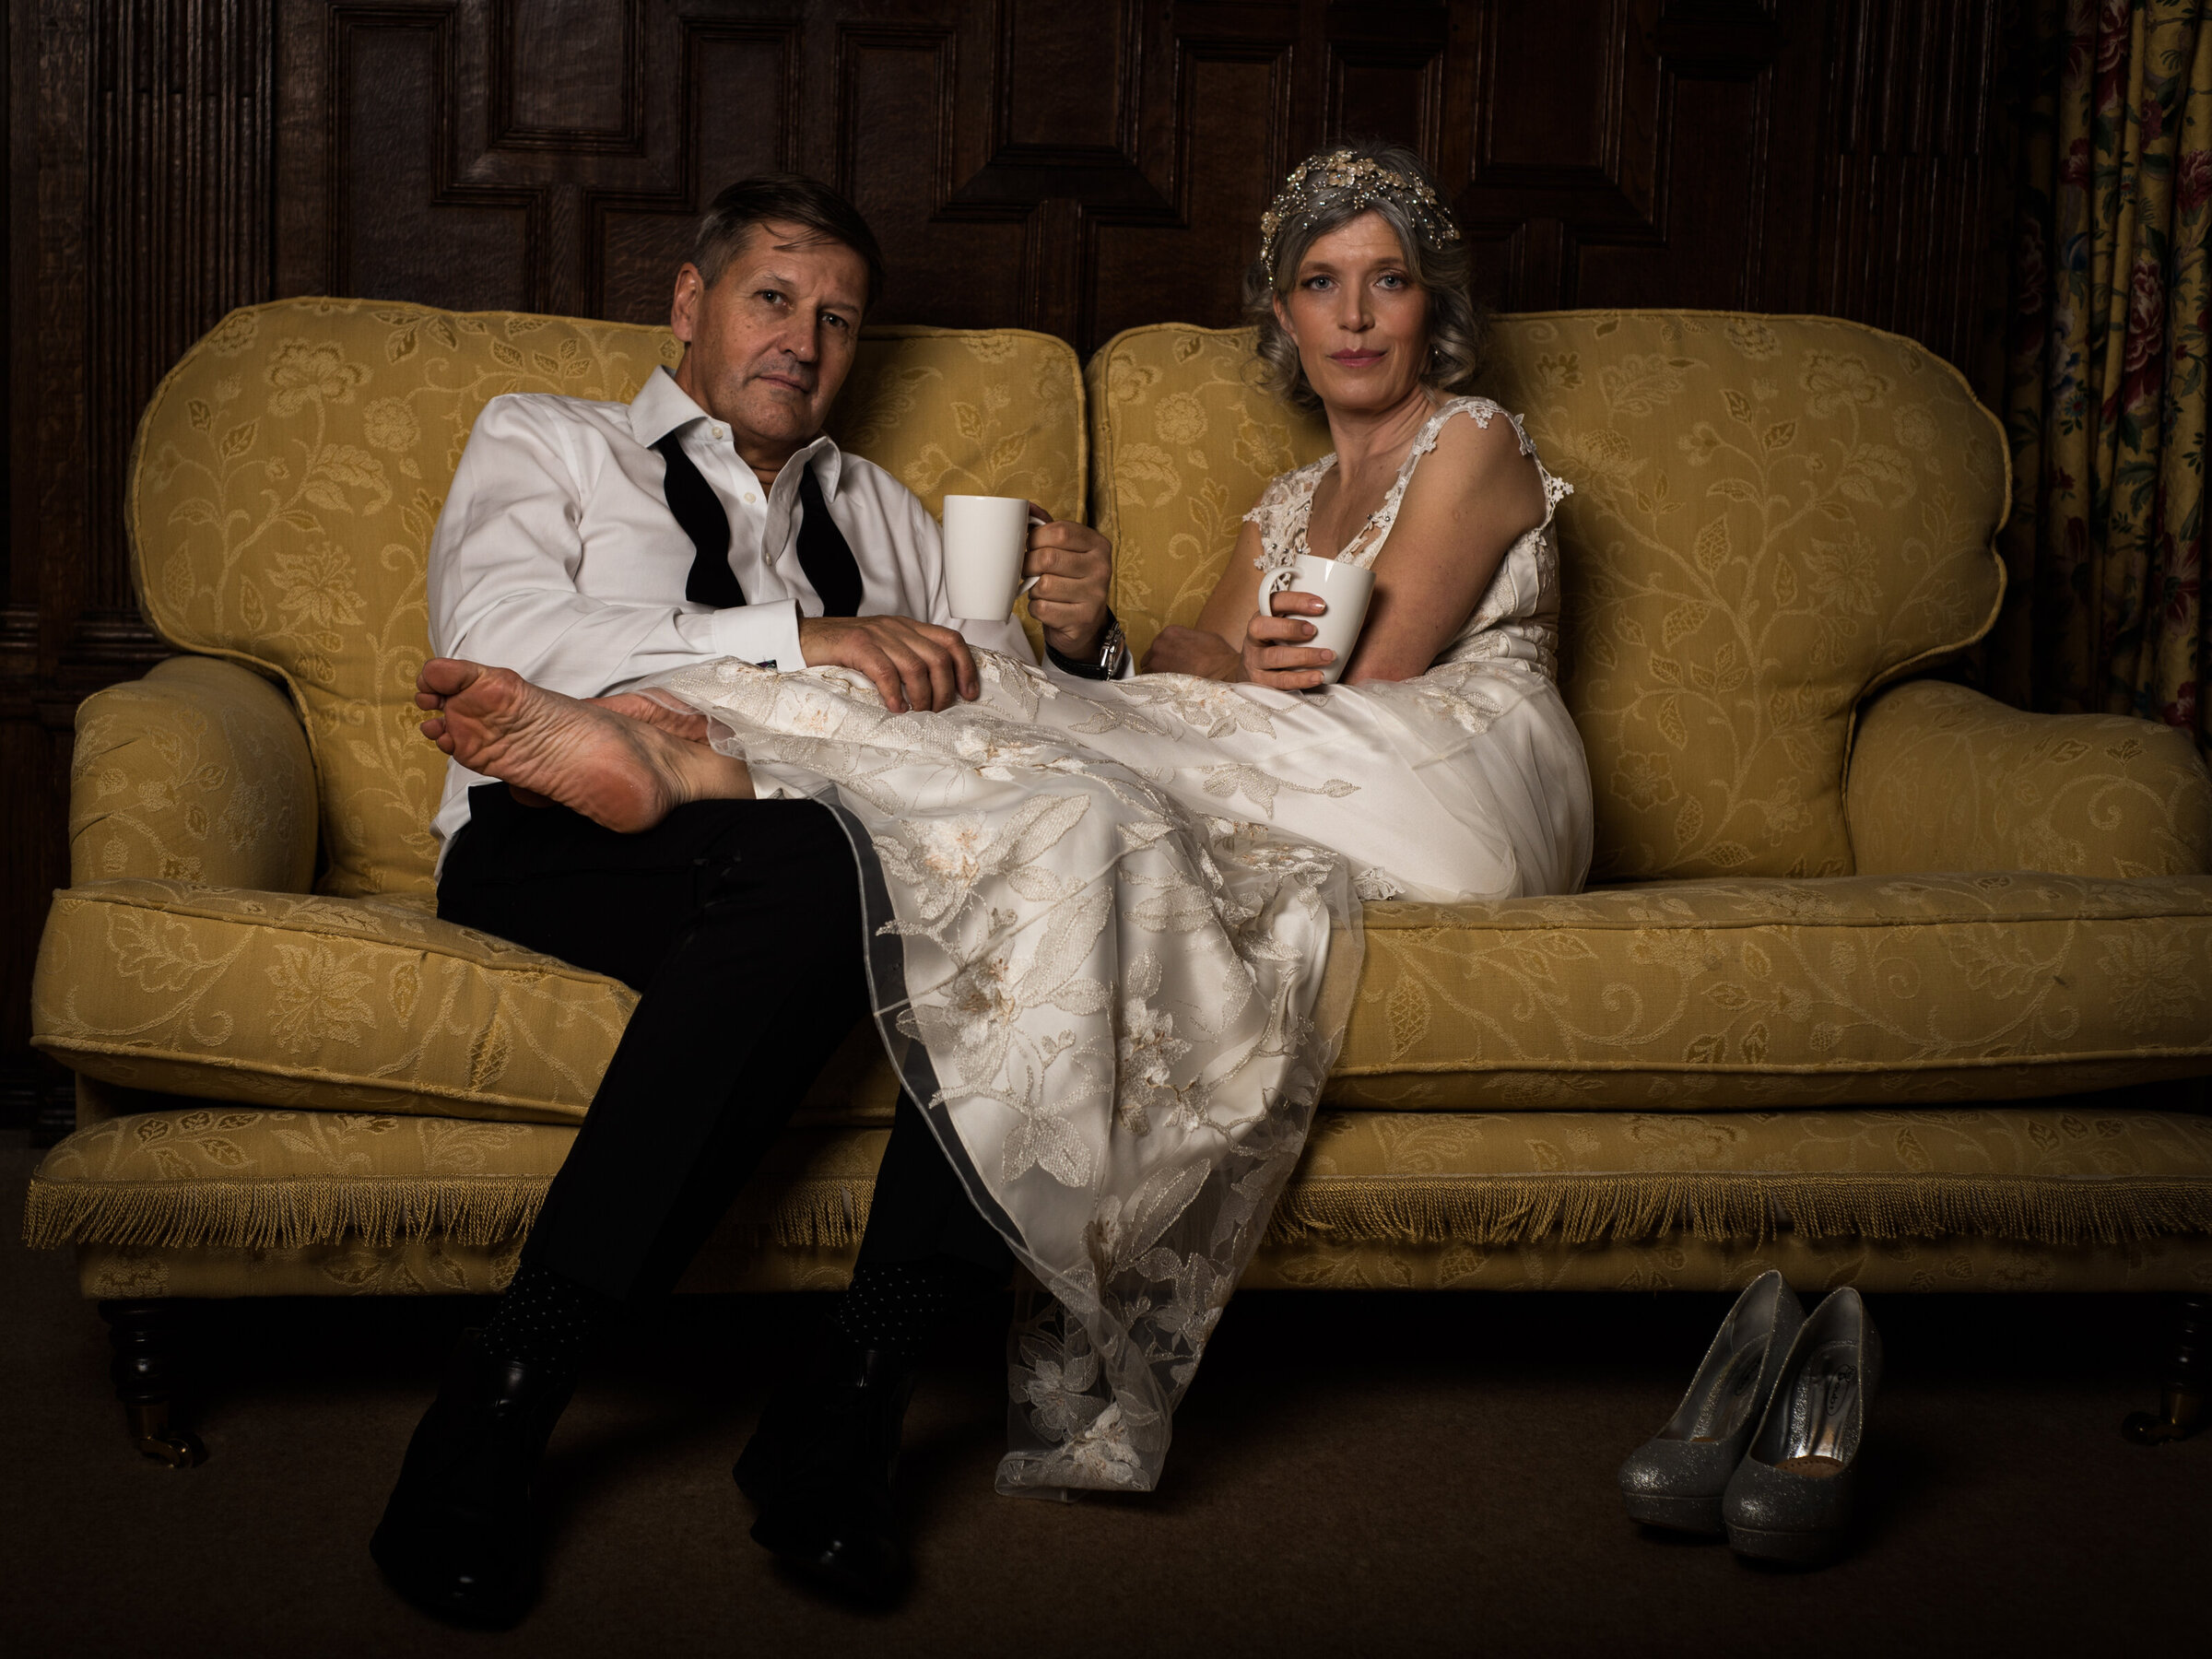 An elegantly attired couple in their 50’s share a moment of relaxed intimacy on a vintage yellow couch, sipping cups of tea and celebrating their private elopement in a setting that whispers of classic charm and quiet revelry